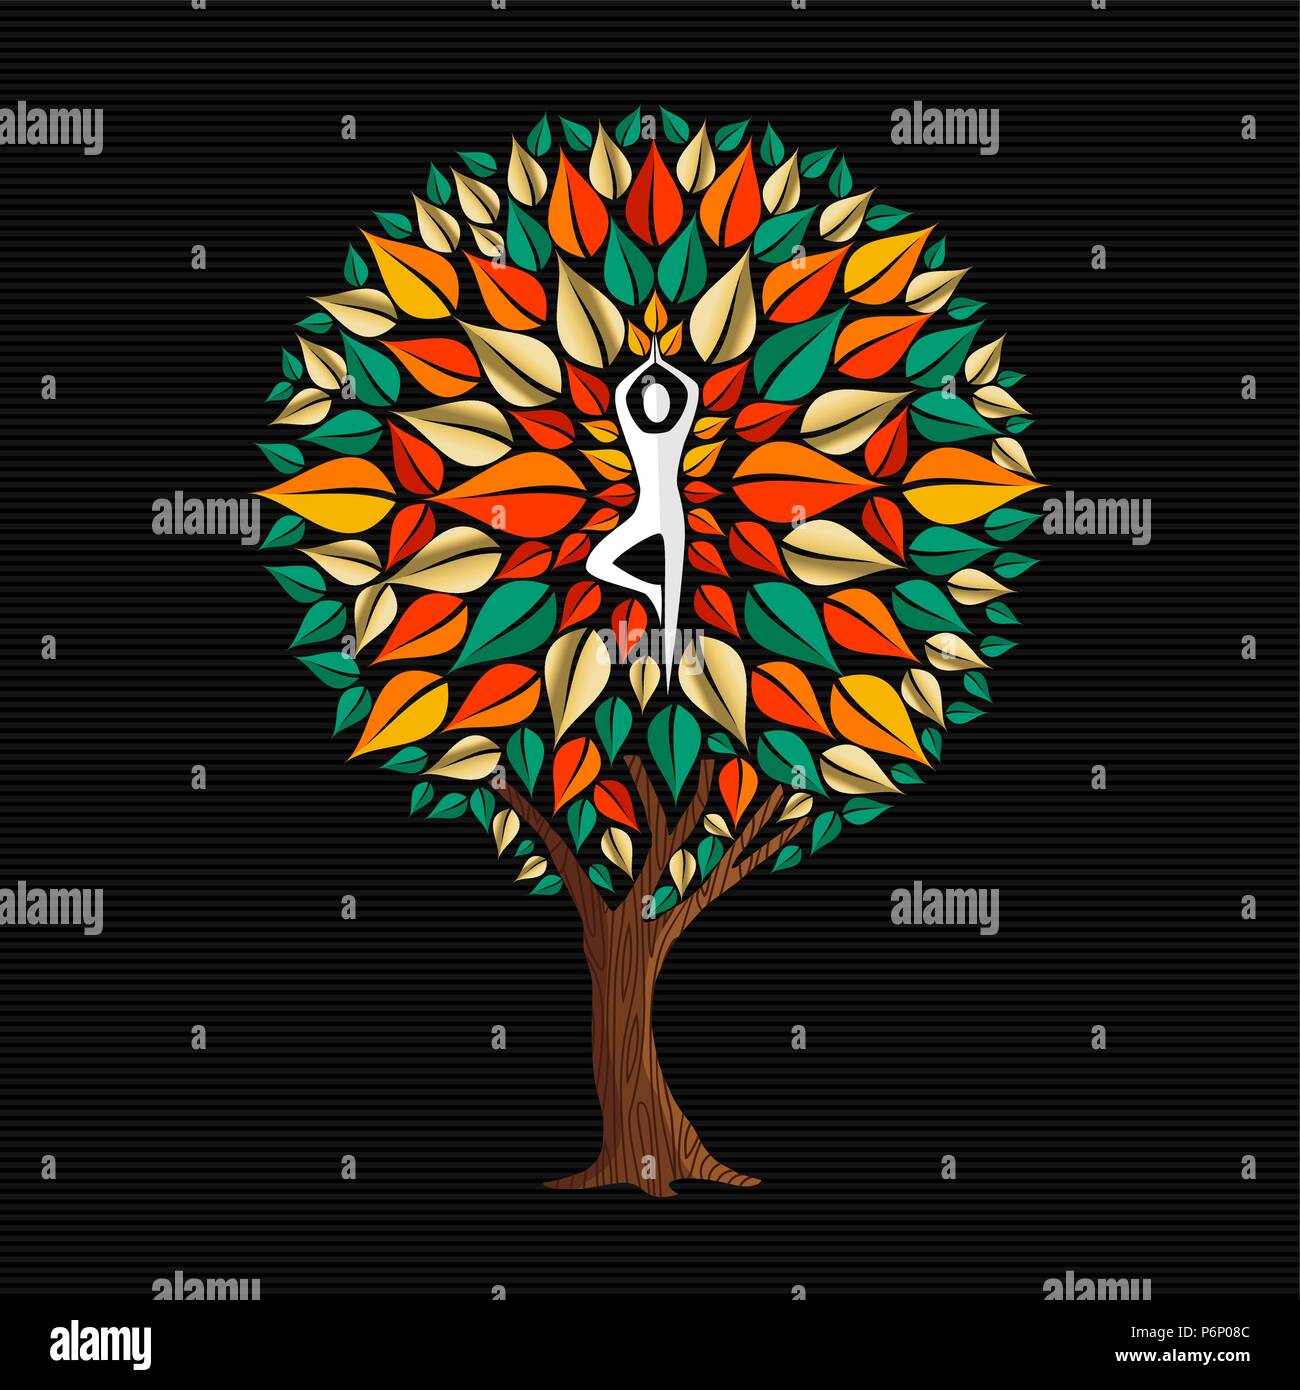 Yoga concept illustration. Woman meditating in tree pose with autumn decoration doing relaxation exercise. EPS10 vector. Stock Vector